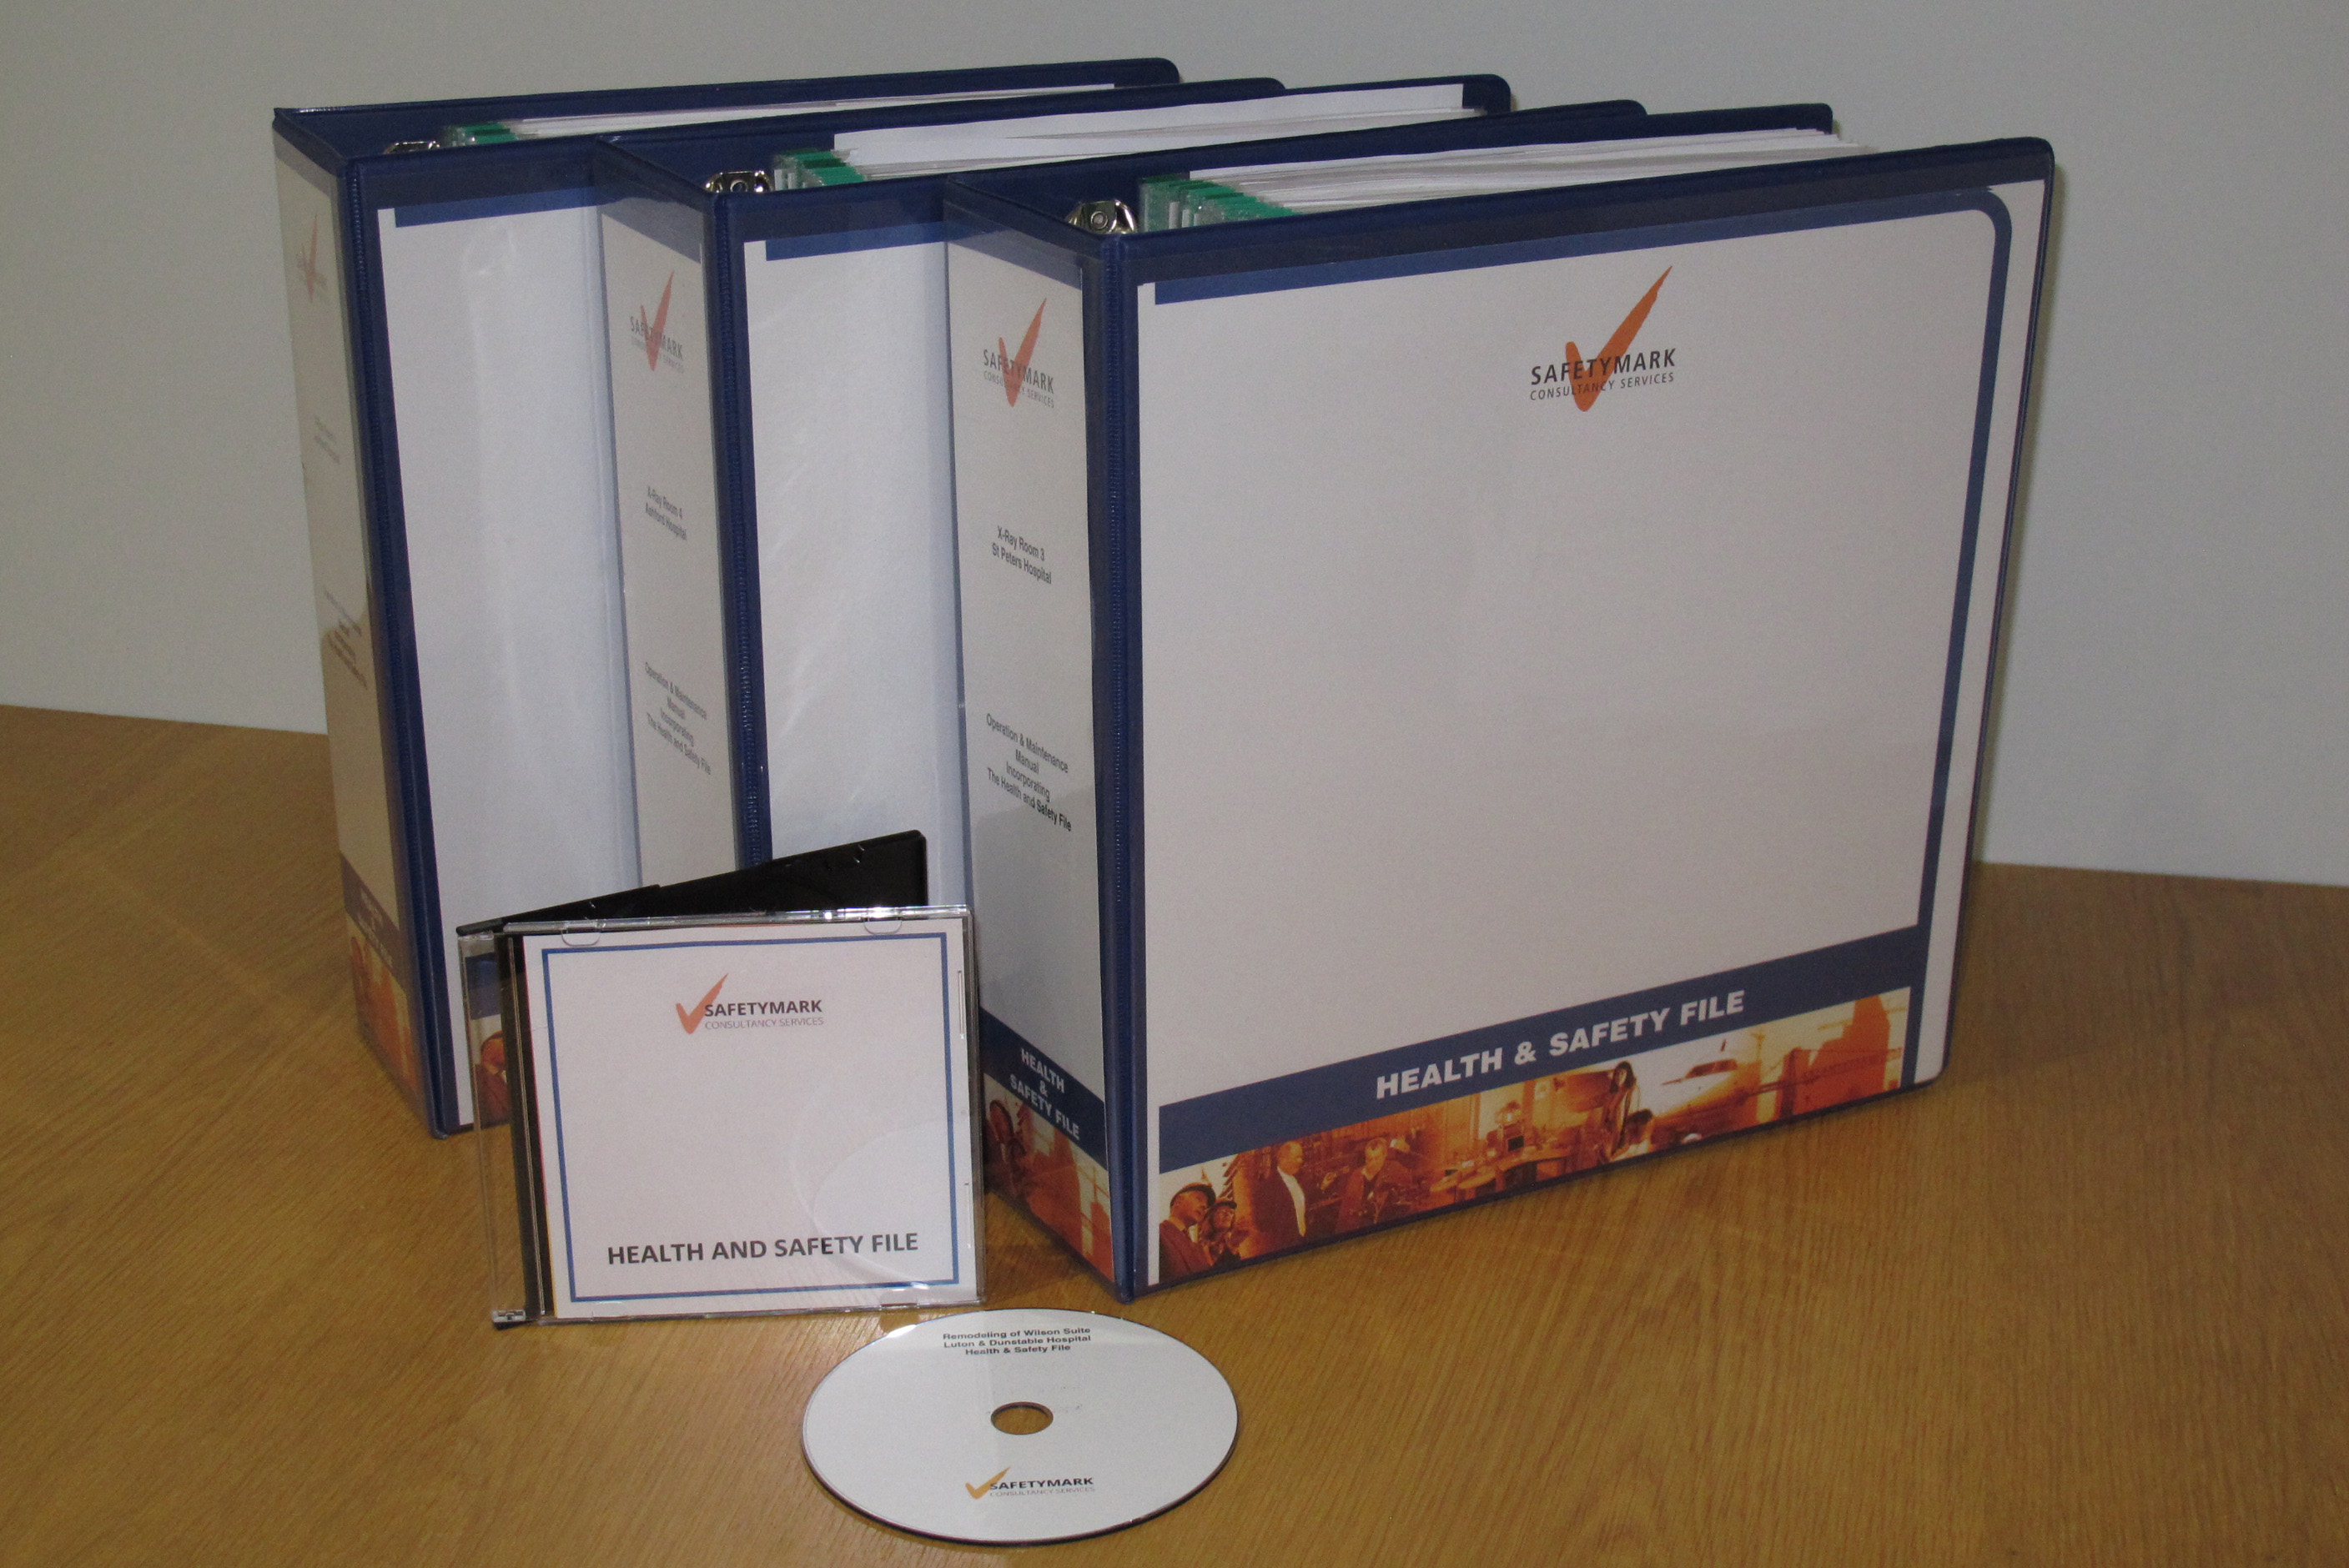 Example of a health and safety files